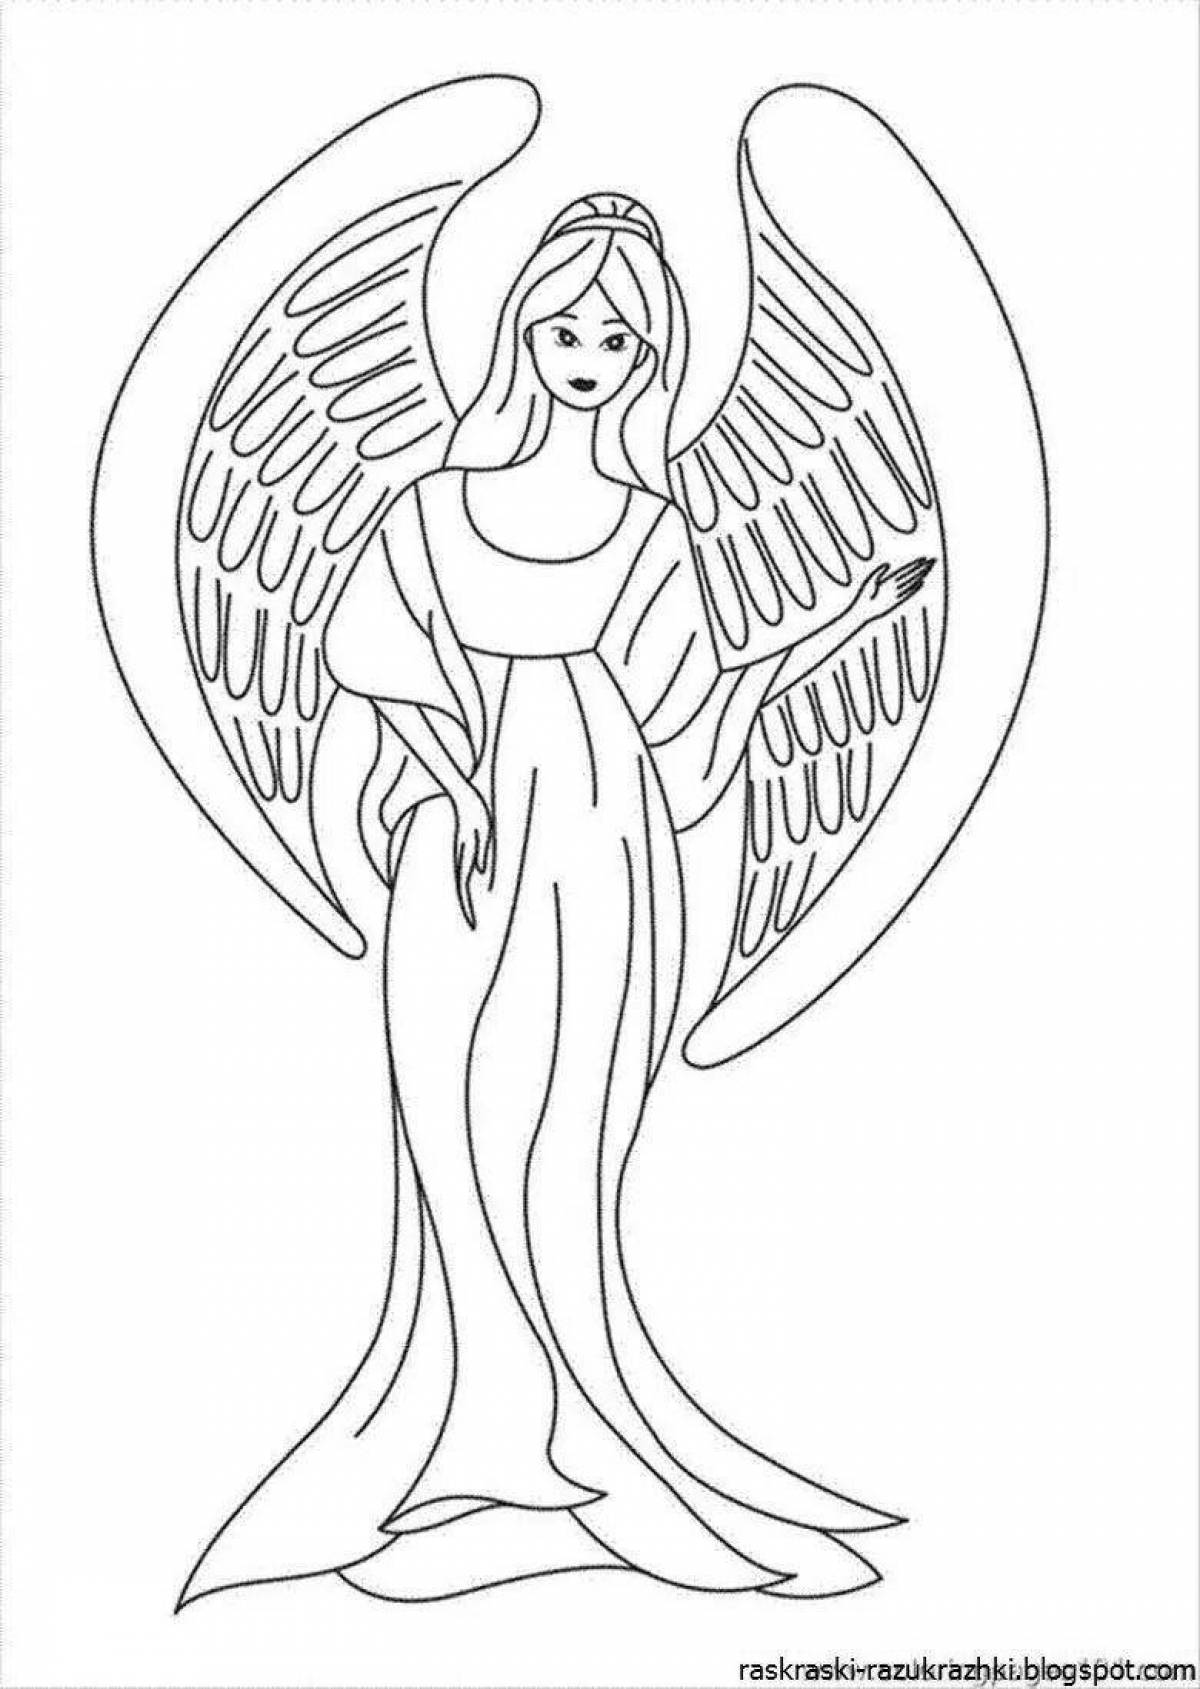 Amazing angel coloring pages with beautiful wings